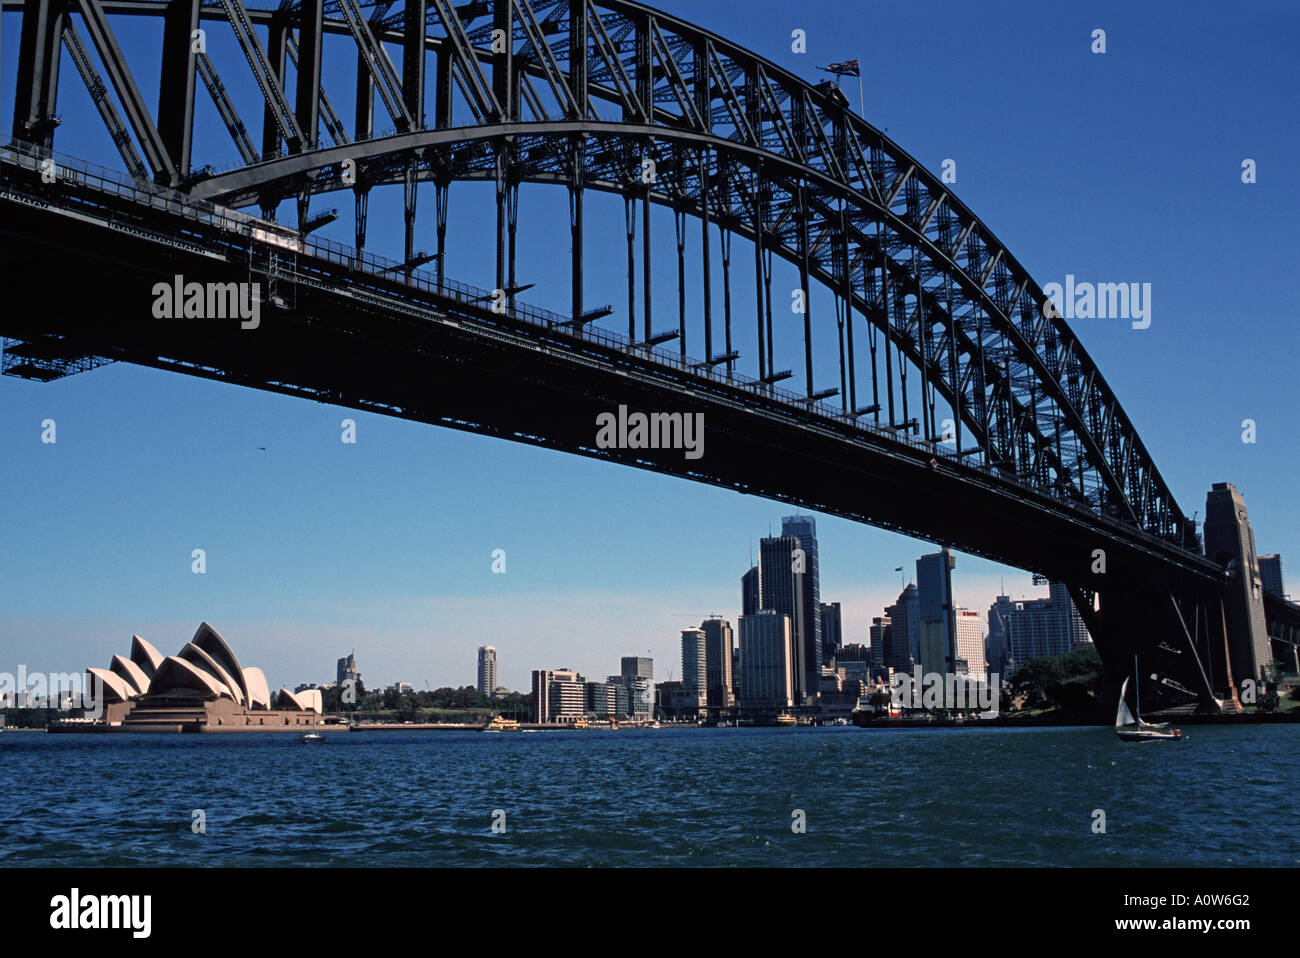 View of the famous Sydney Harbour Bridge and Opera House below Sydney New South Wales Australia Stock Photo